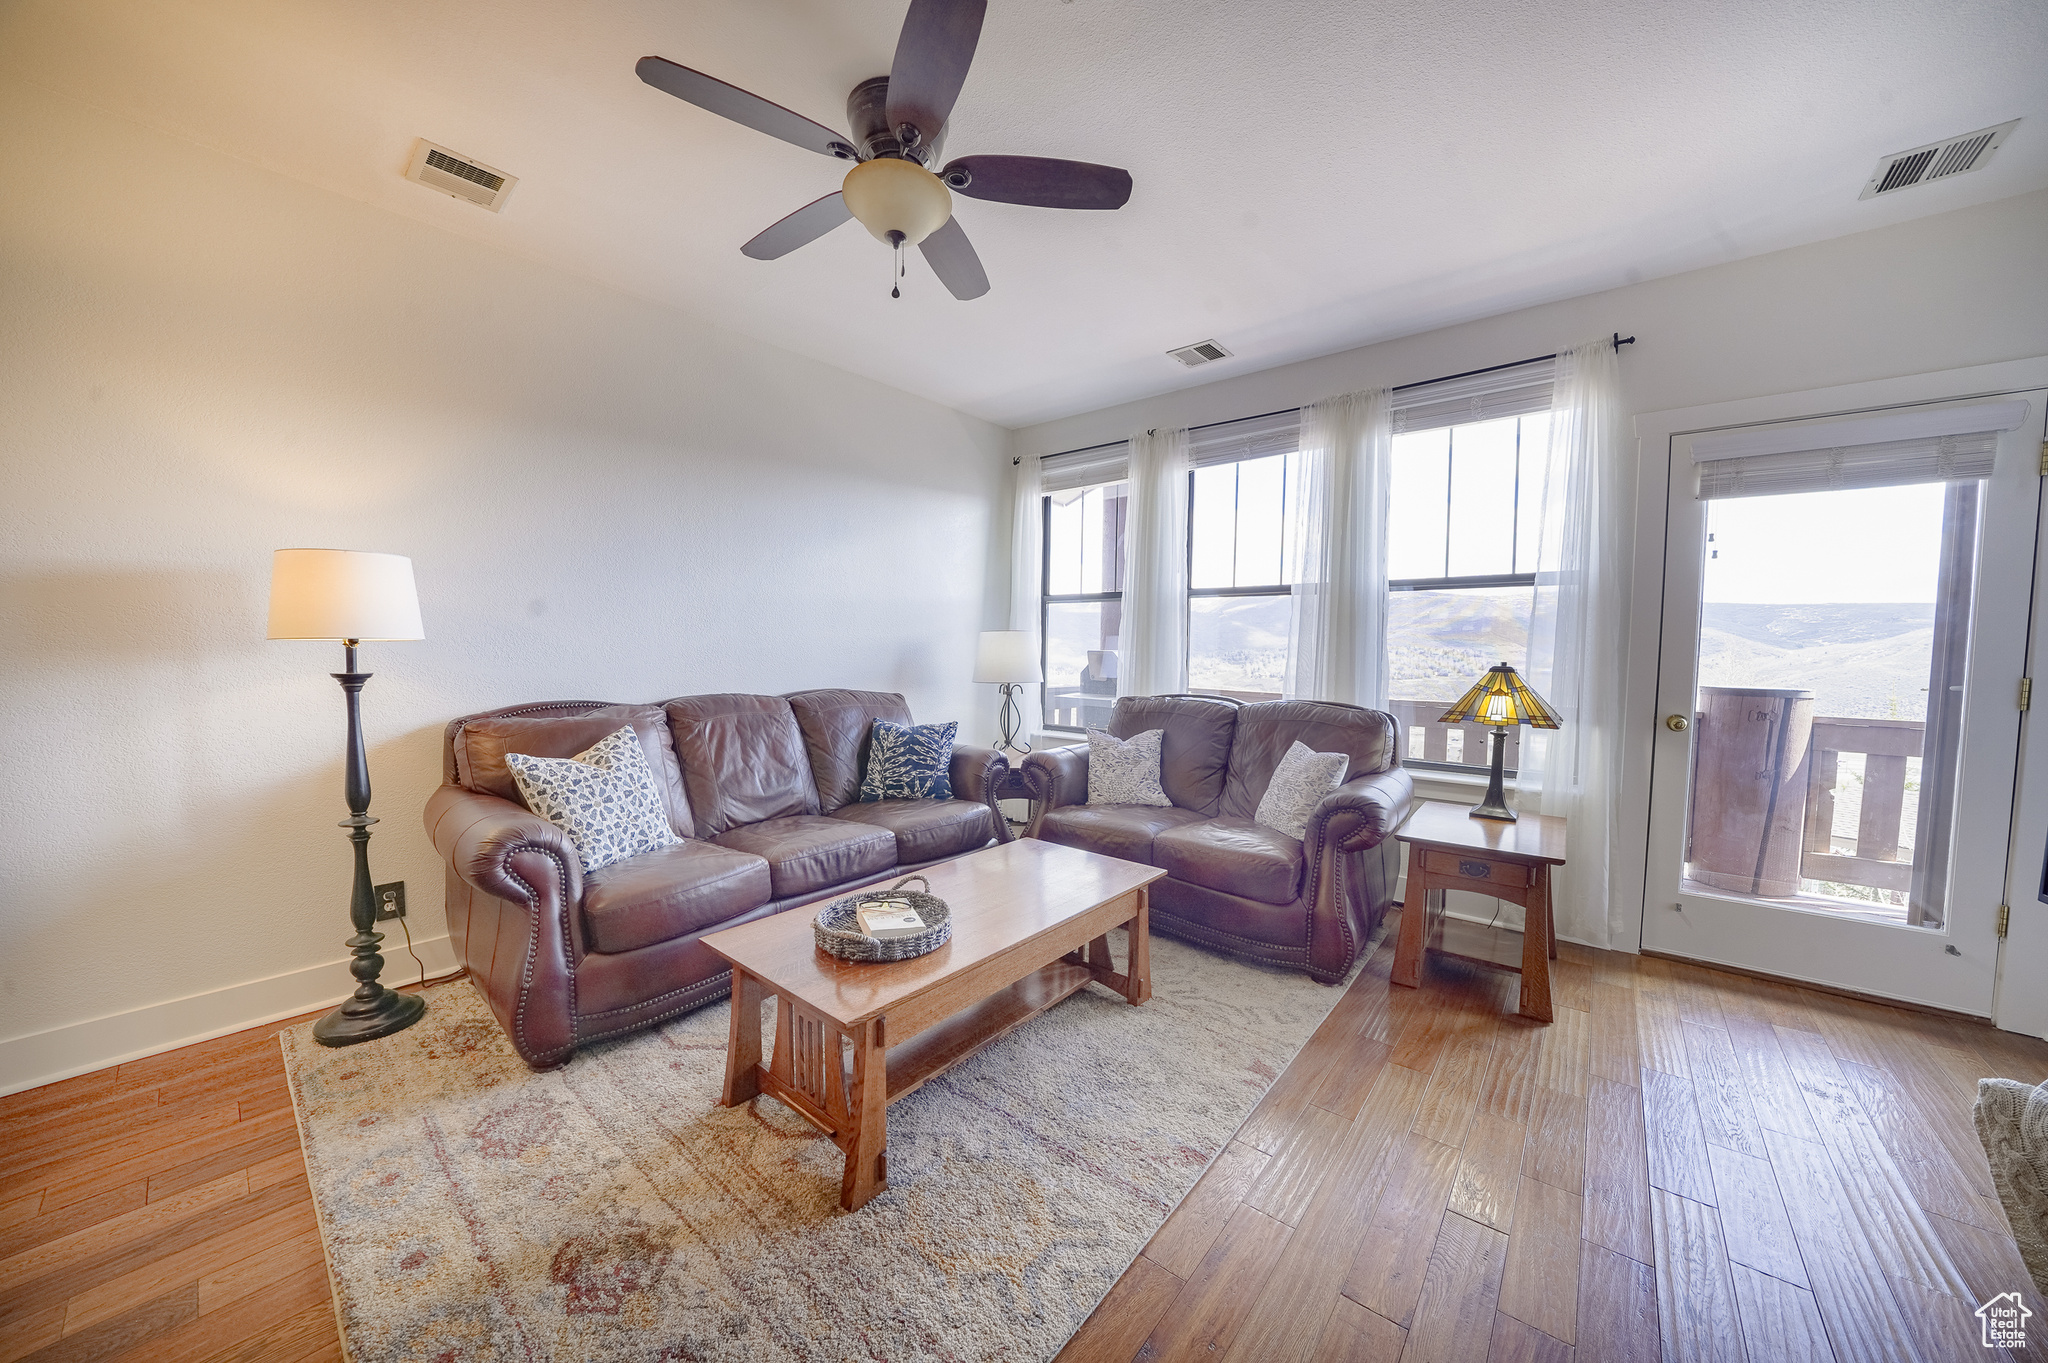 Living room with hardwood / wood-style flooring, plenty of natural light, and ceiling fan